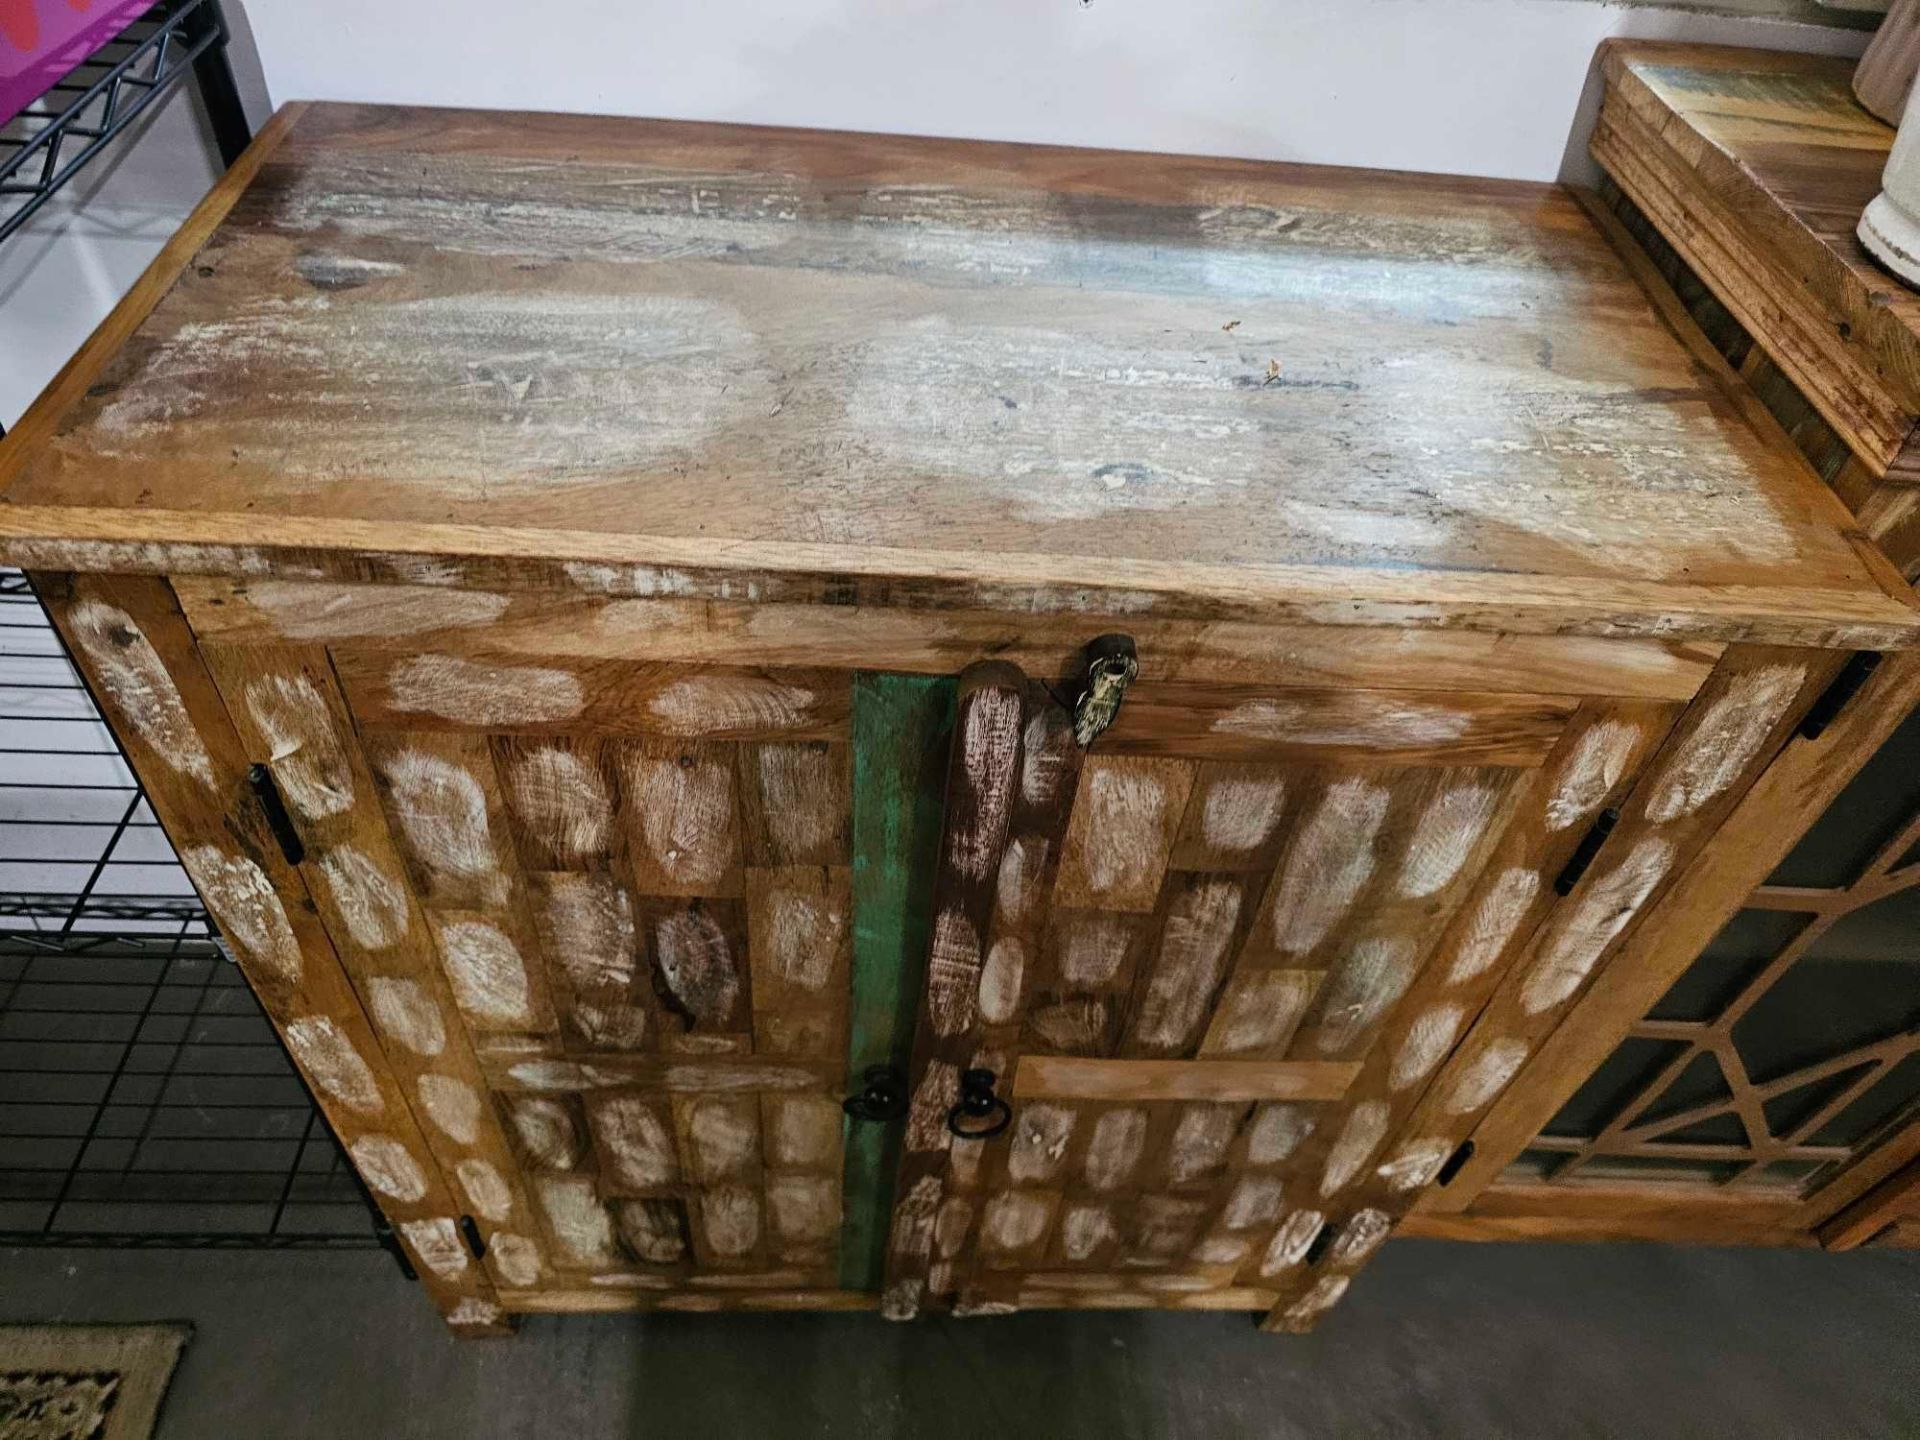 A Indian Hand-Carved And Painted Reclaimed Wood Cabinet Distressed 80 x 40 x 90cm - Image 2 of 3